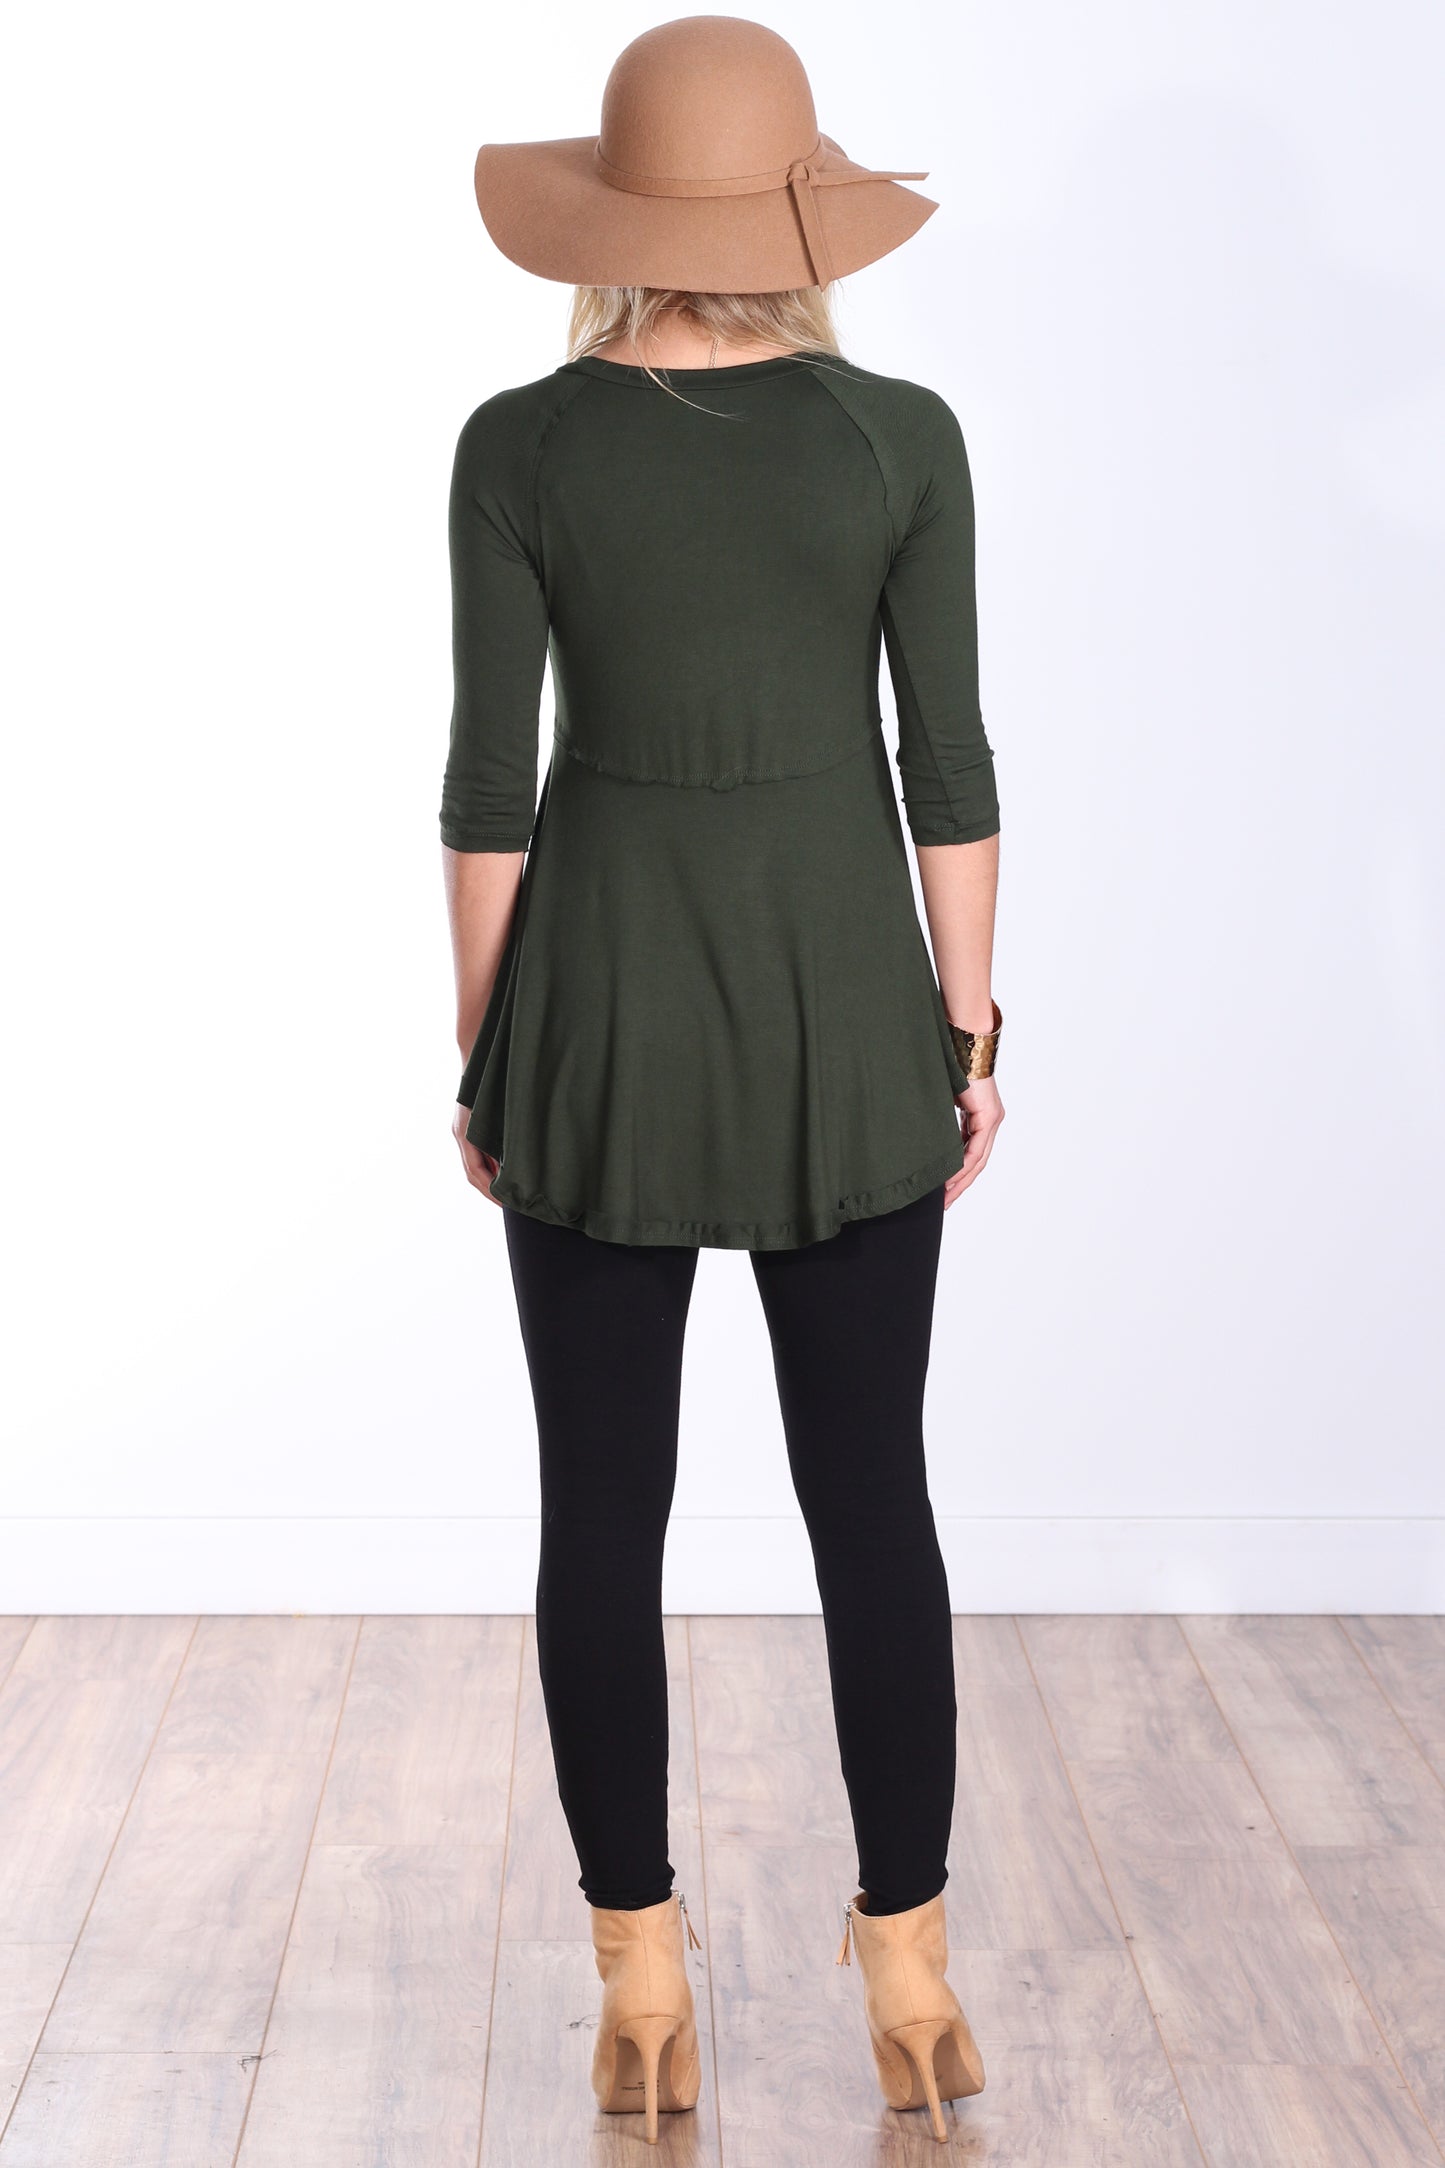 Olive 3/4 Sleeve Tunic Top - FINAL SALE